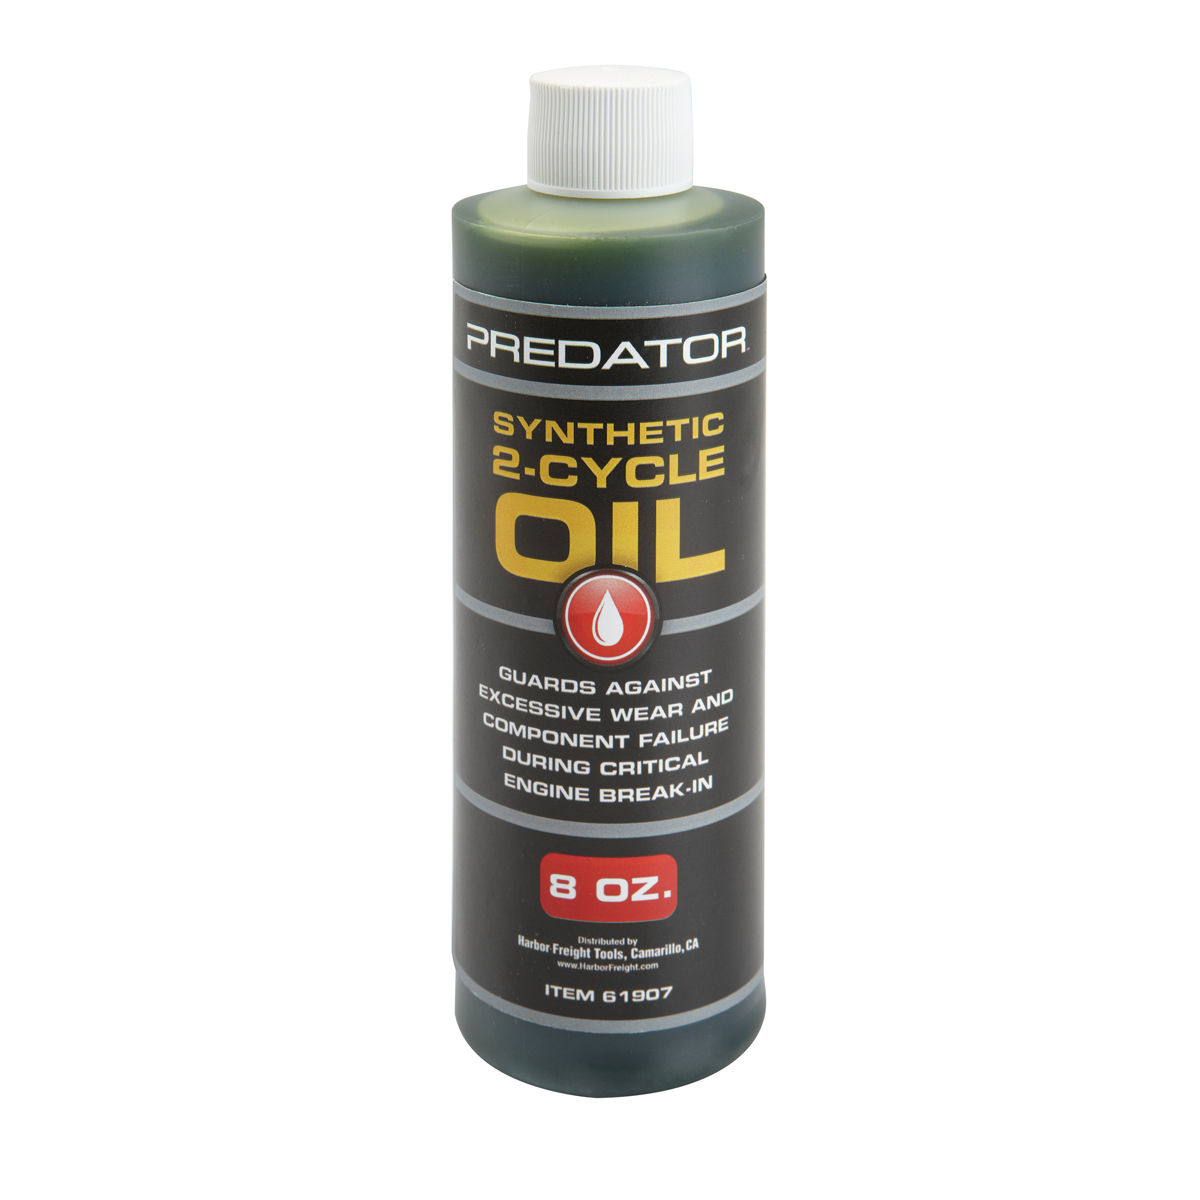 PREDATOR Synthetic Two Cycle Engine Oil 8 oz. - Item 61907